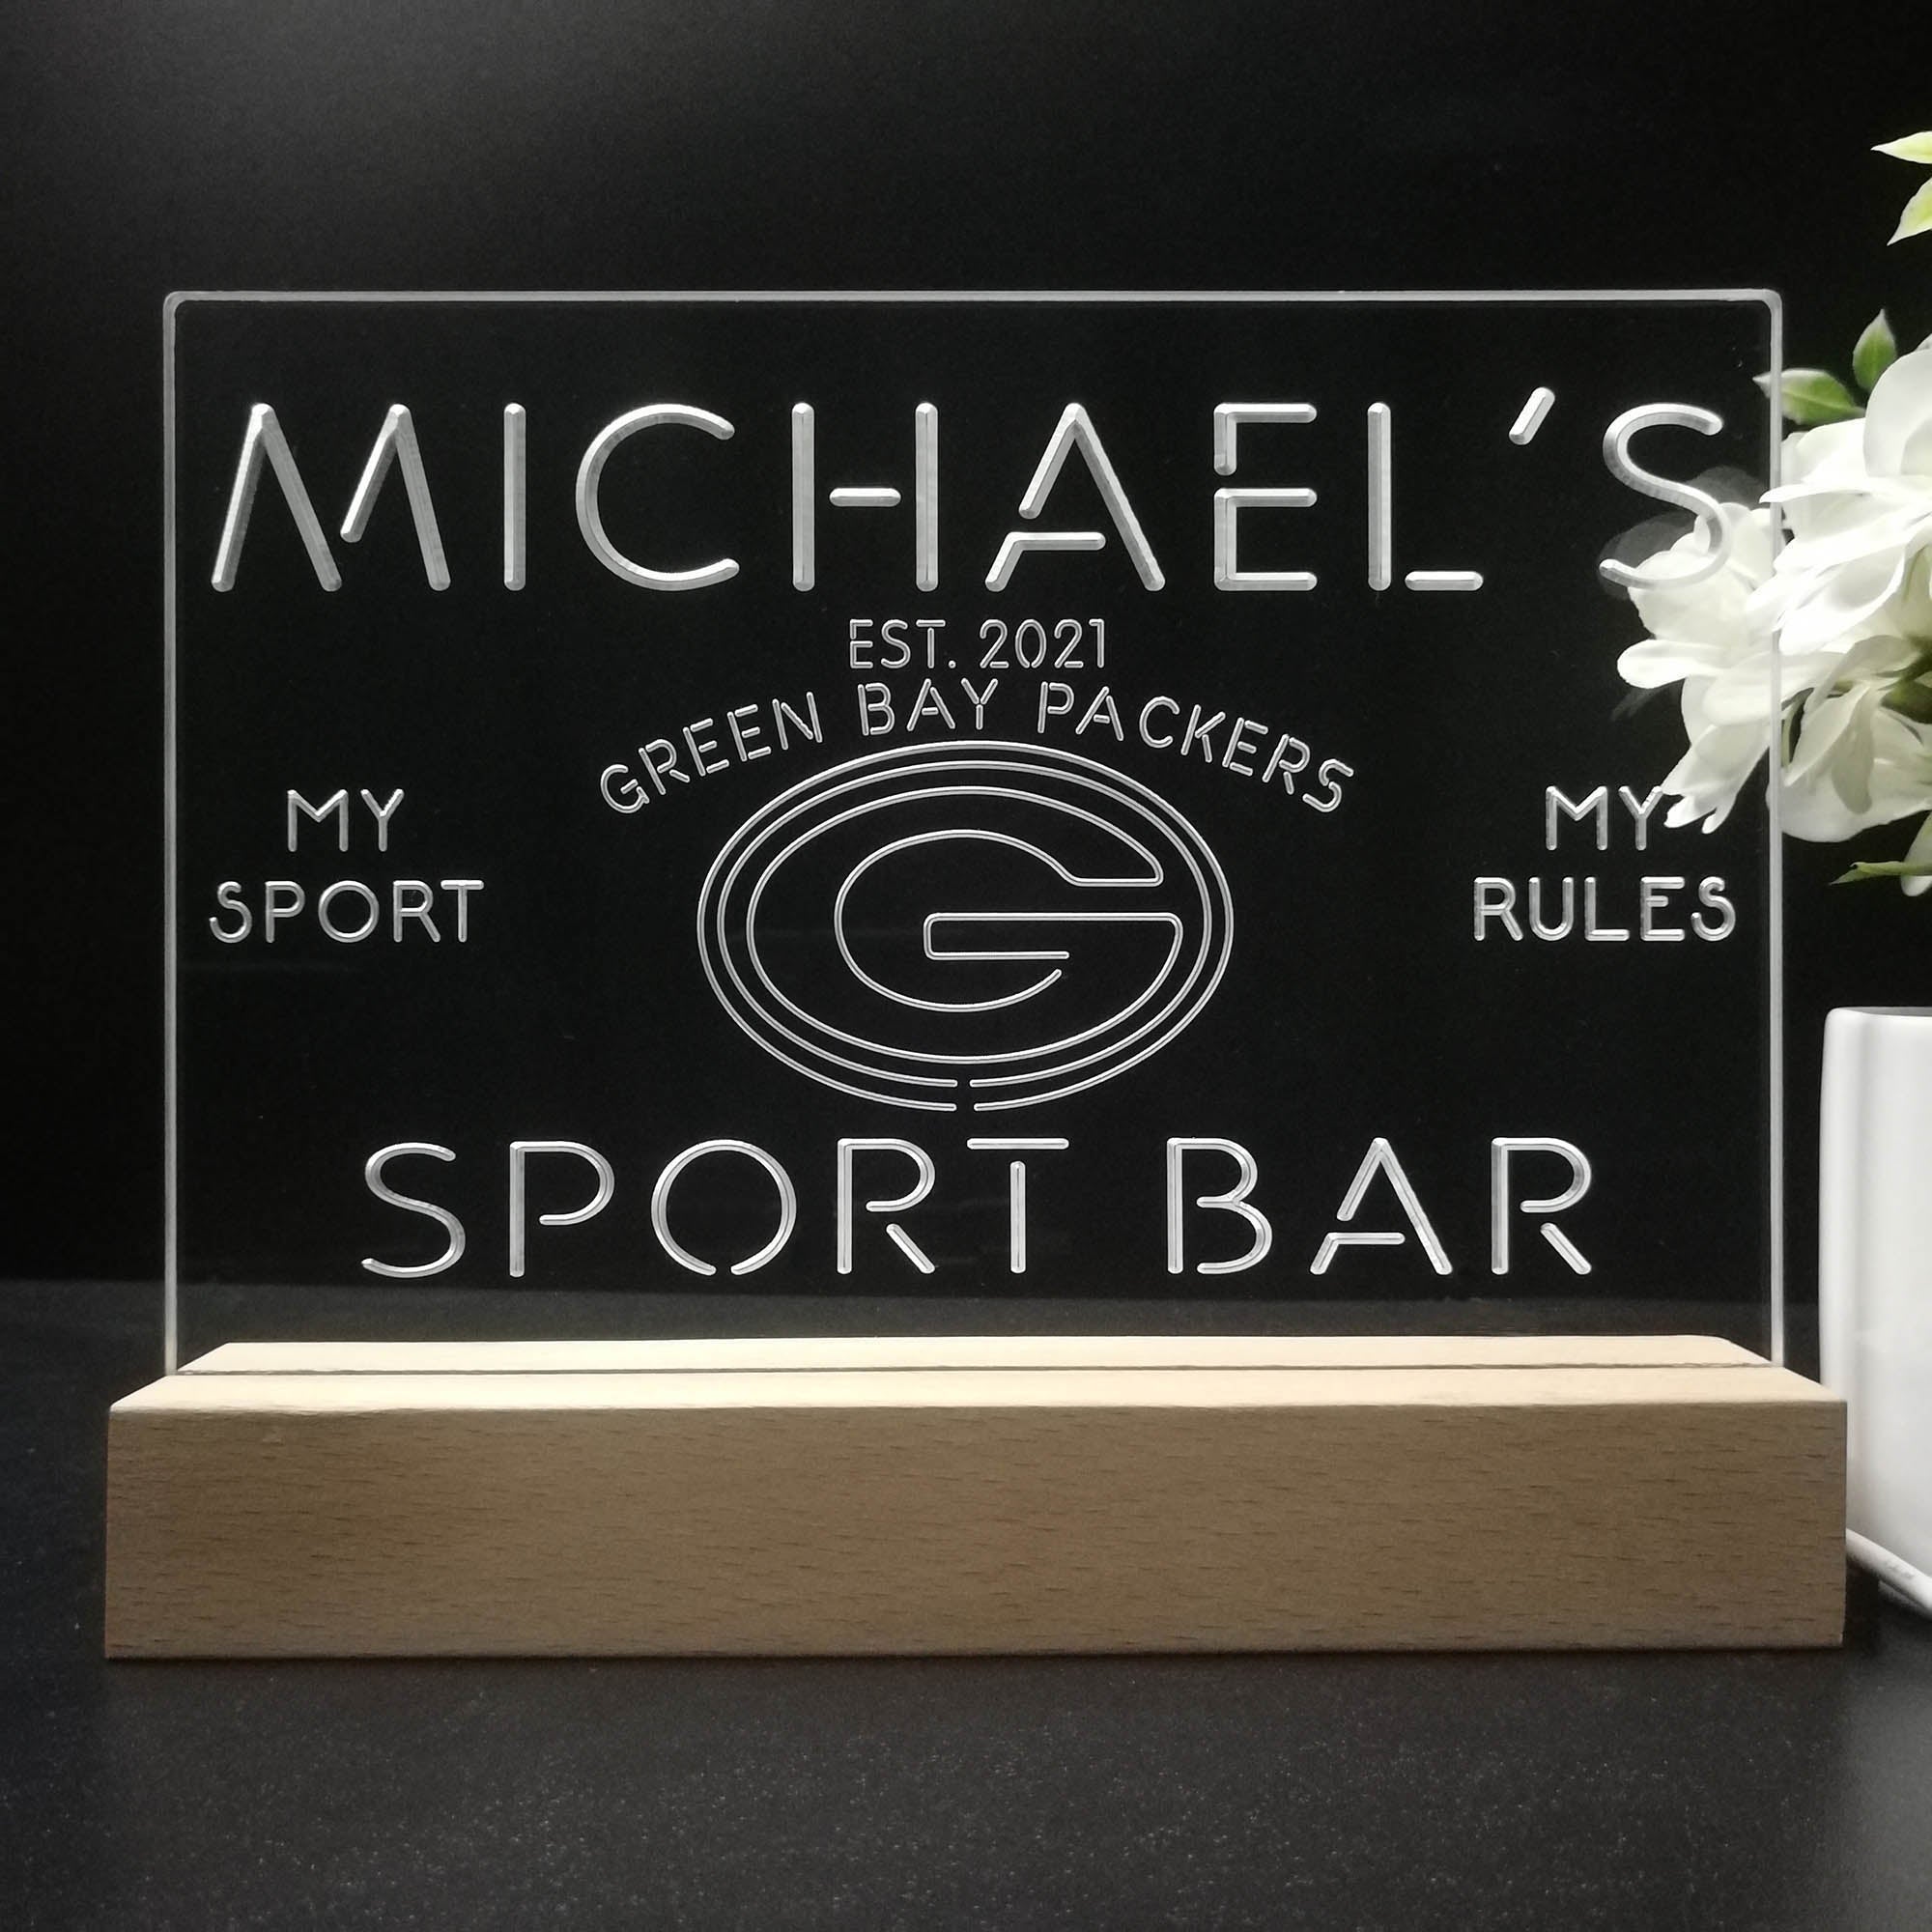 Personalized Green Bay Packers Souvenir Neon LED Night Light Sign